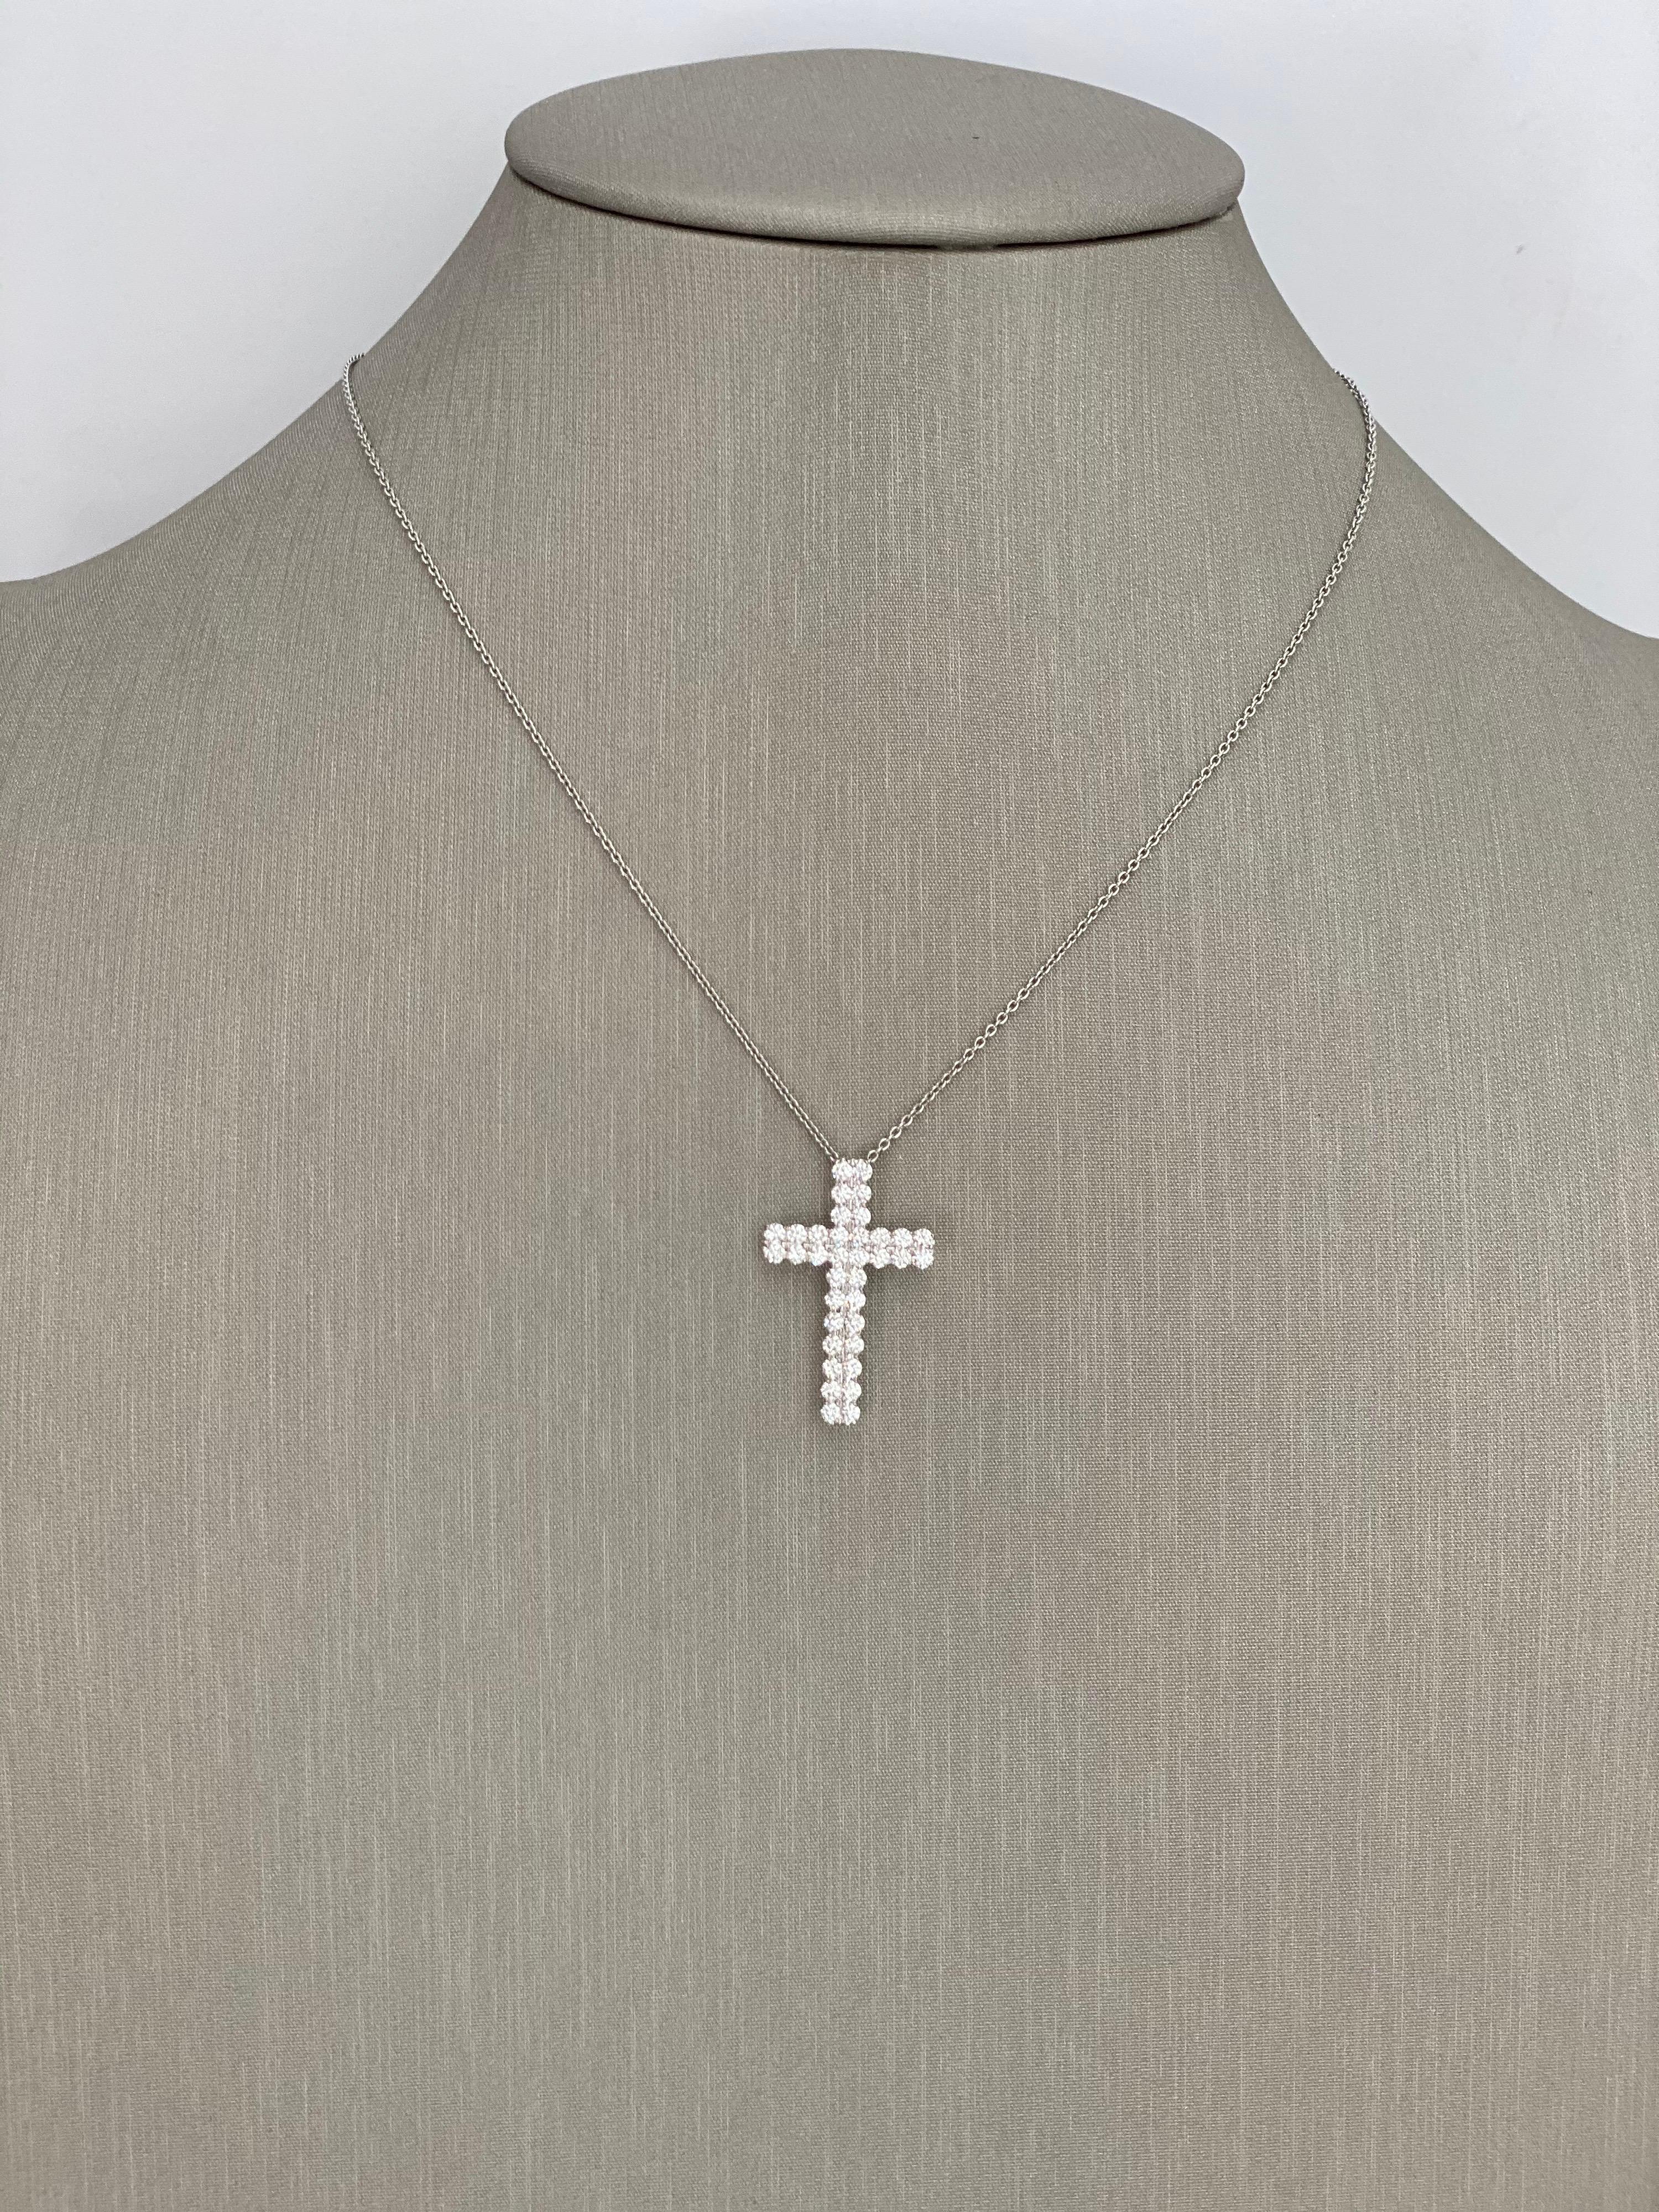 Diamond Cross Pendant Necklace with 1.01 Carats of F-G colored brilliant round cut stones.  The diamonds are meticulously hand set in shared prongs to show more of the diamond,  We too had the back of the diamonds set  away from the gold all to